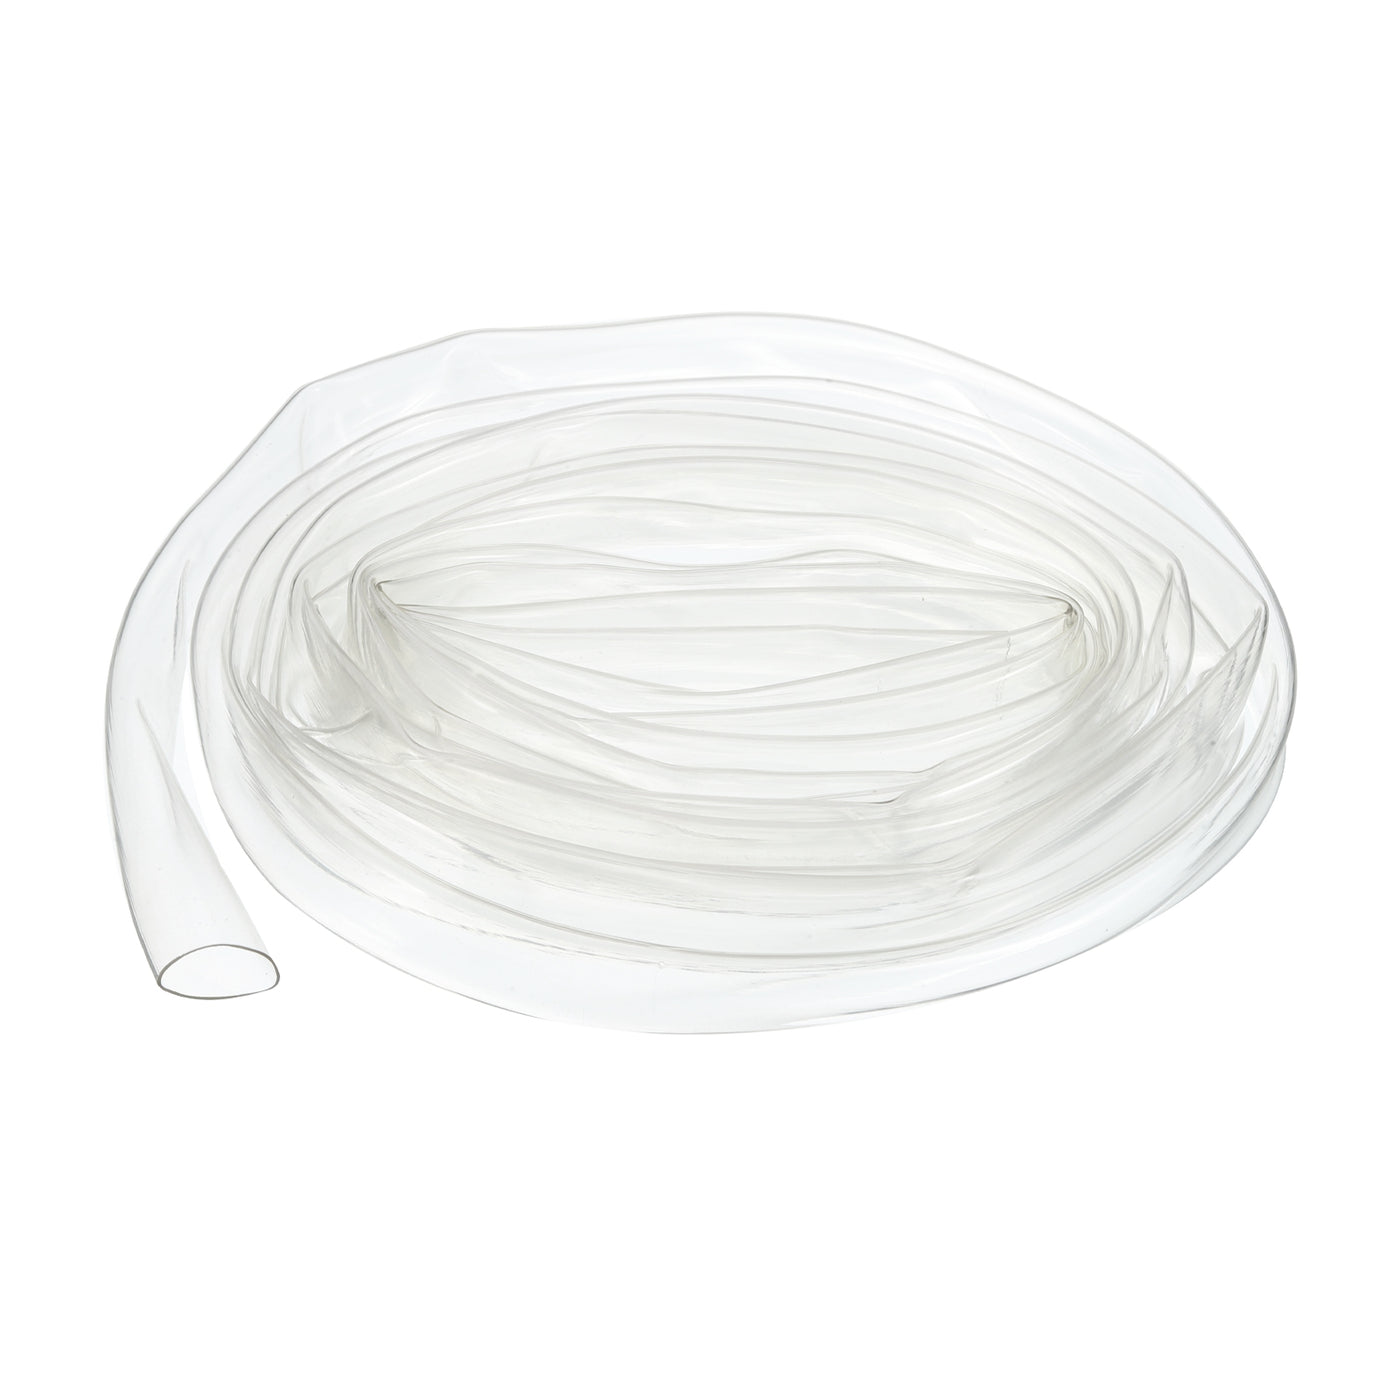 uxcell Uxcell Clear PVC Tube Wire Harness Tubing, 3/8-inch(10mm) ID 10ft Sleeve for Wire Sheathing Wire Protection